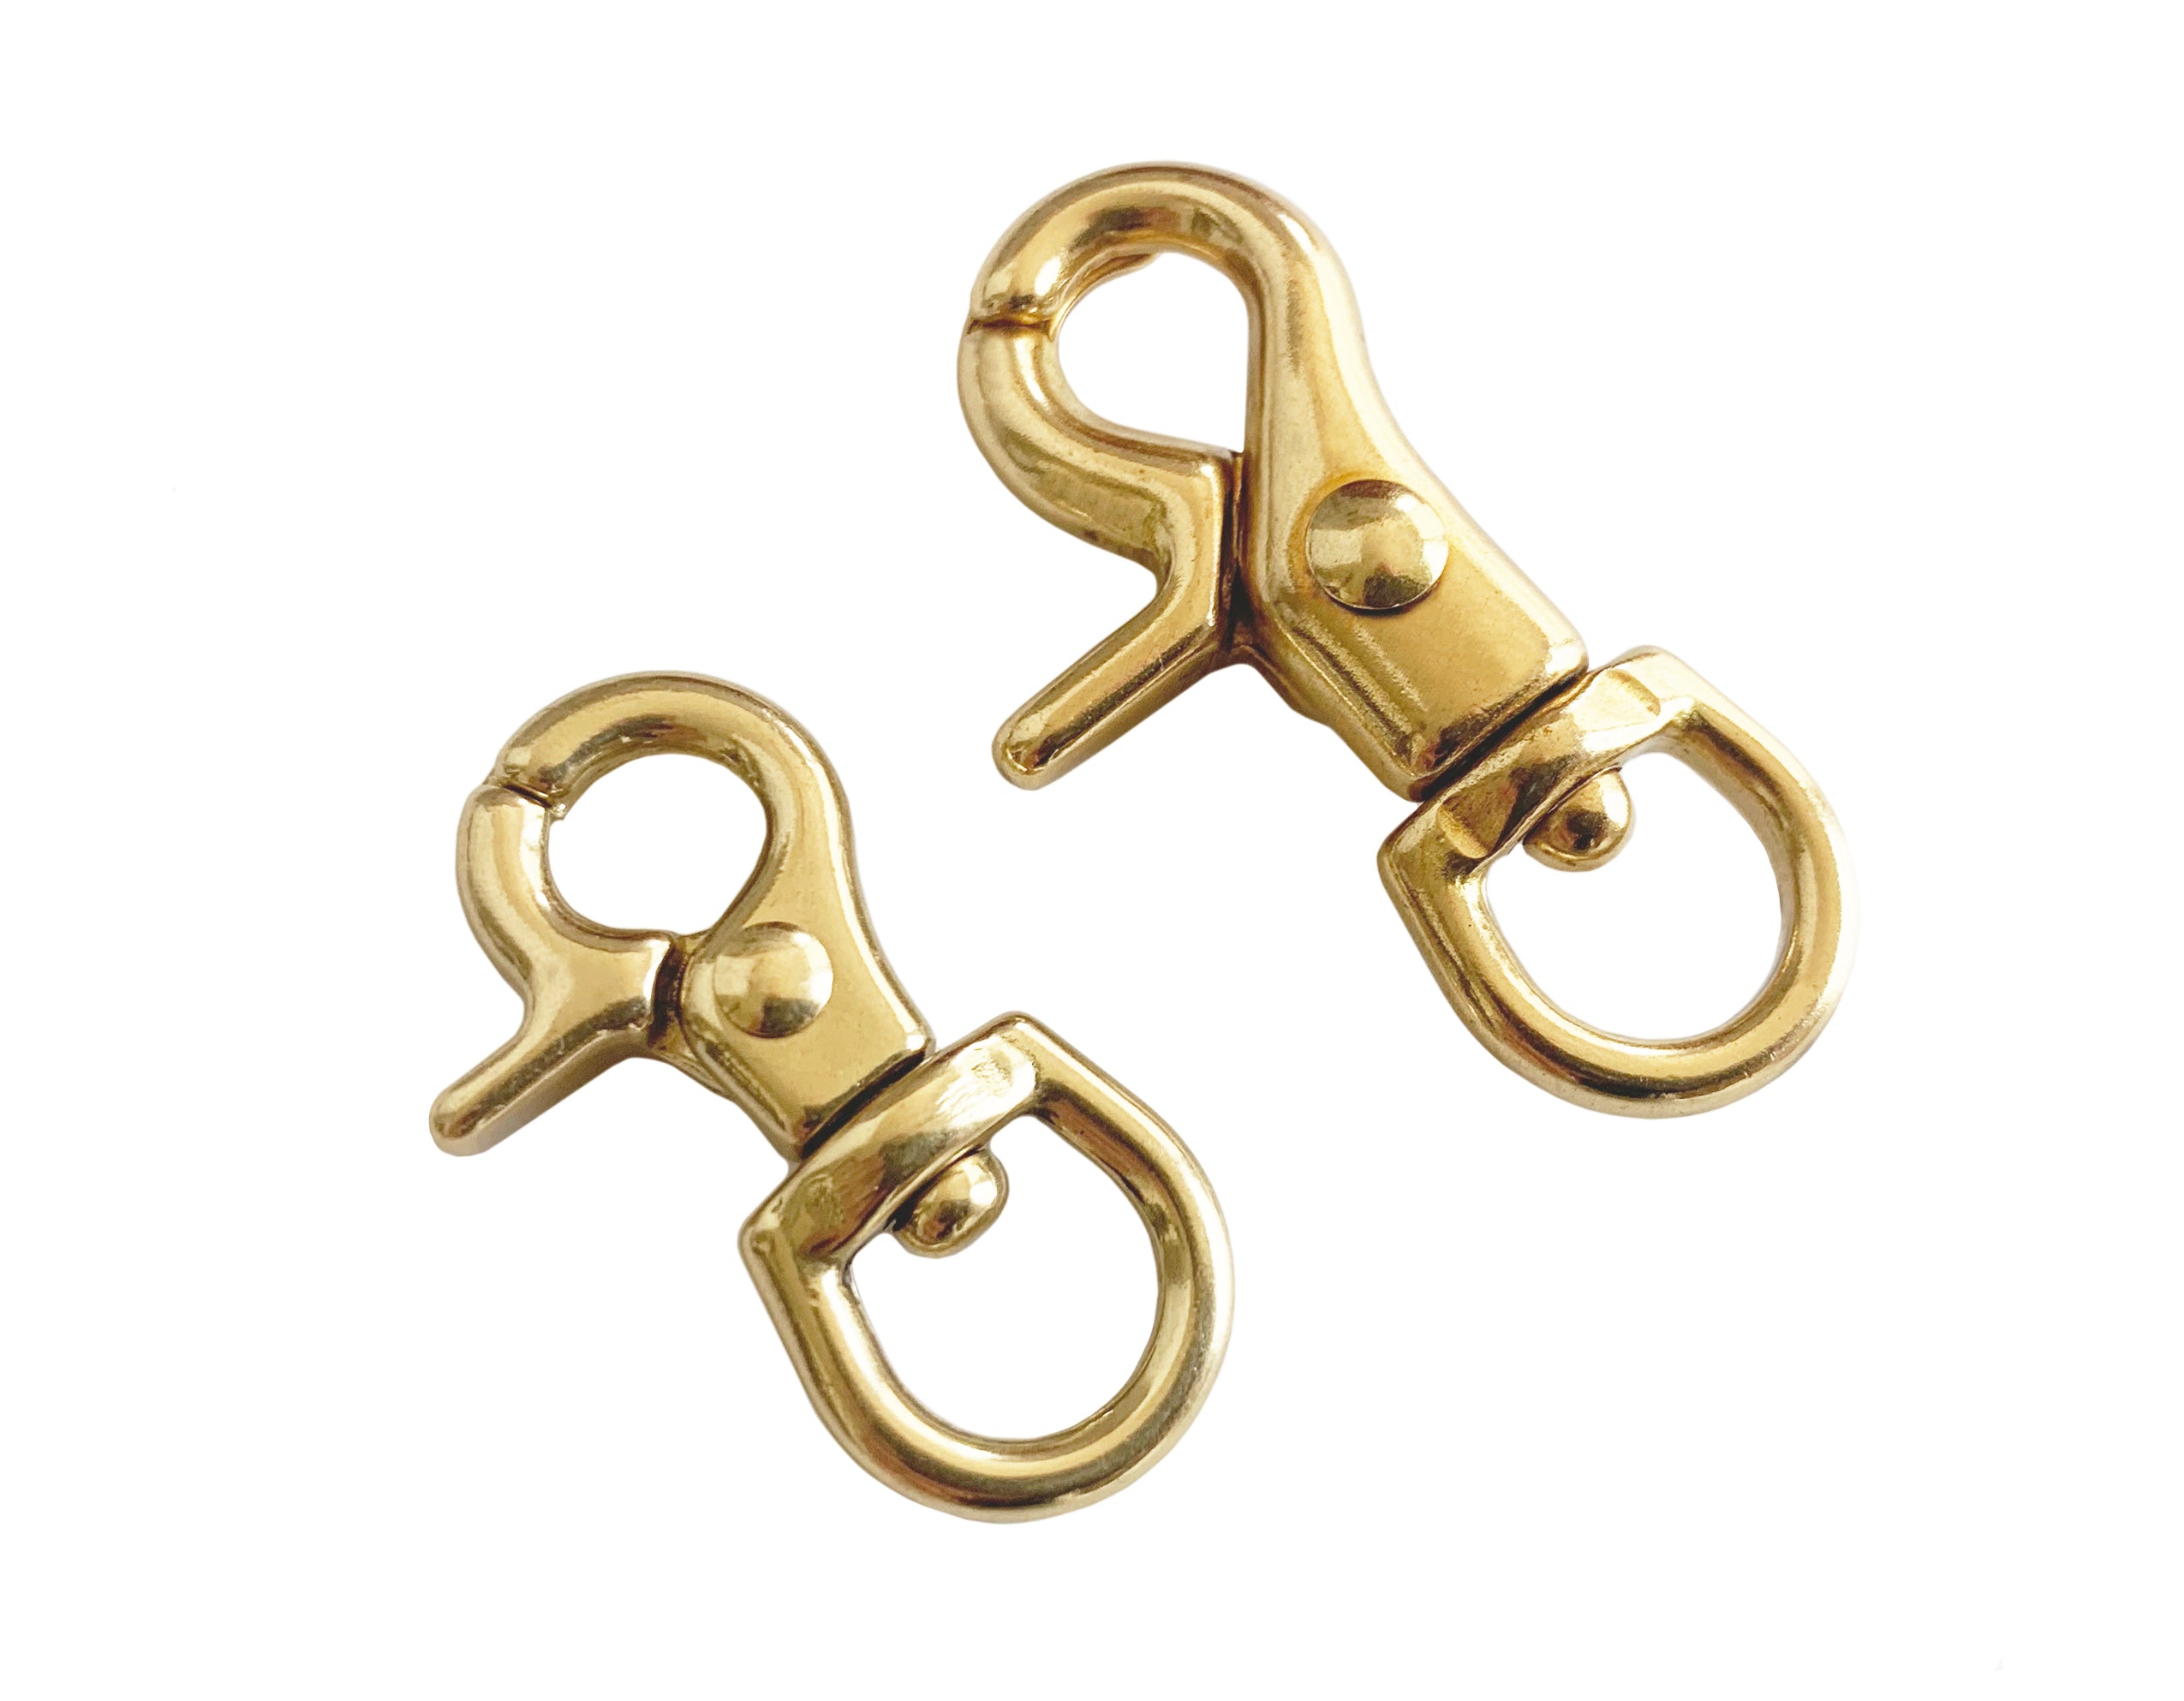 Rainbow Trigger Snap Hook Zinc Metal Swivel Clasp Lobster Claws 10 13 19 26  32 38mm Wholesale 220610 From Pu06, $12.12